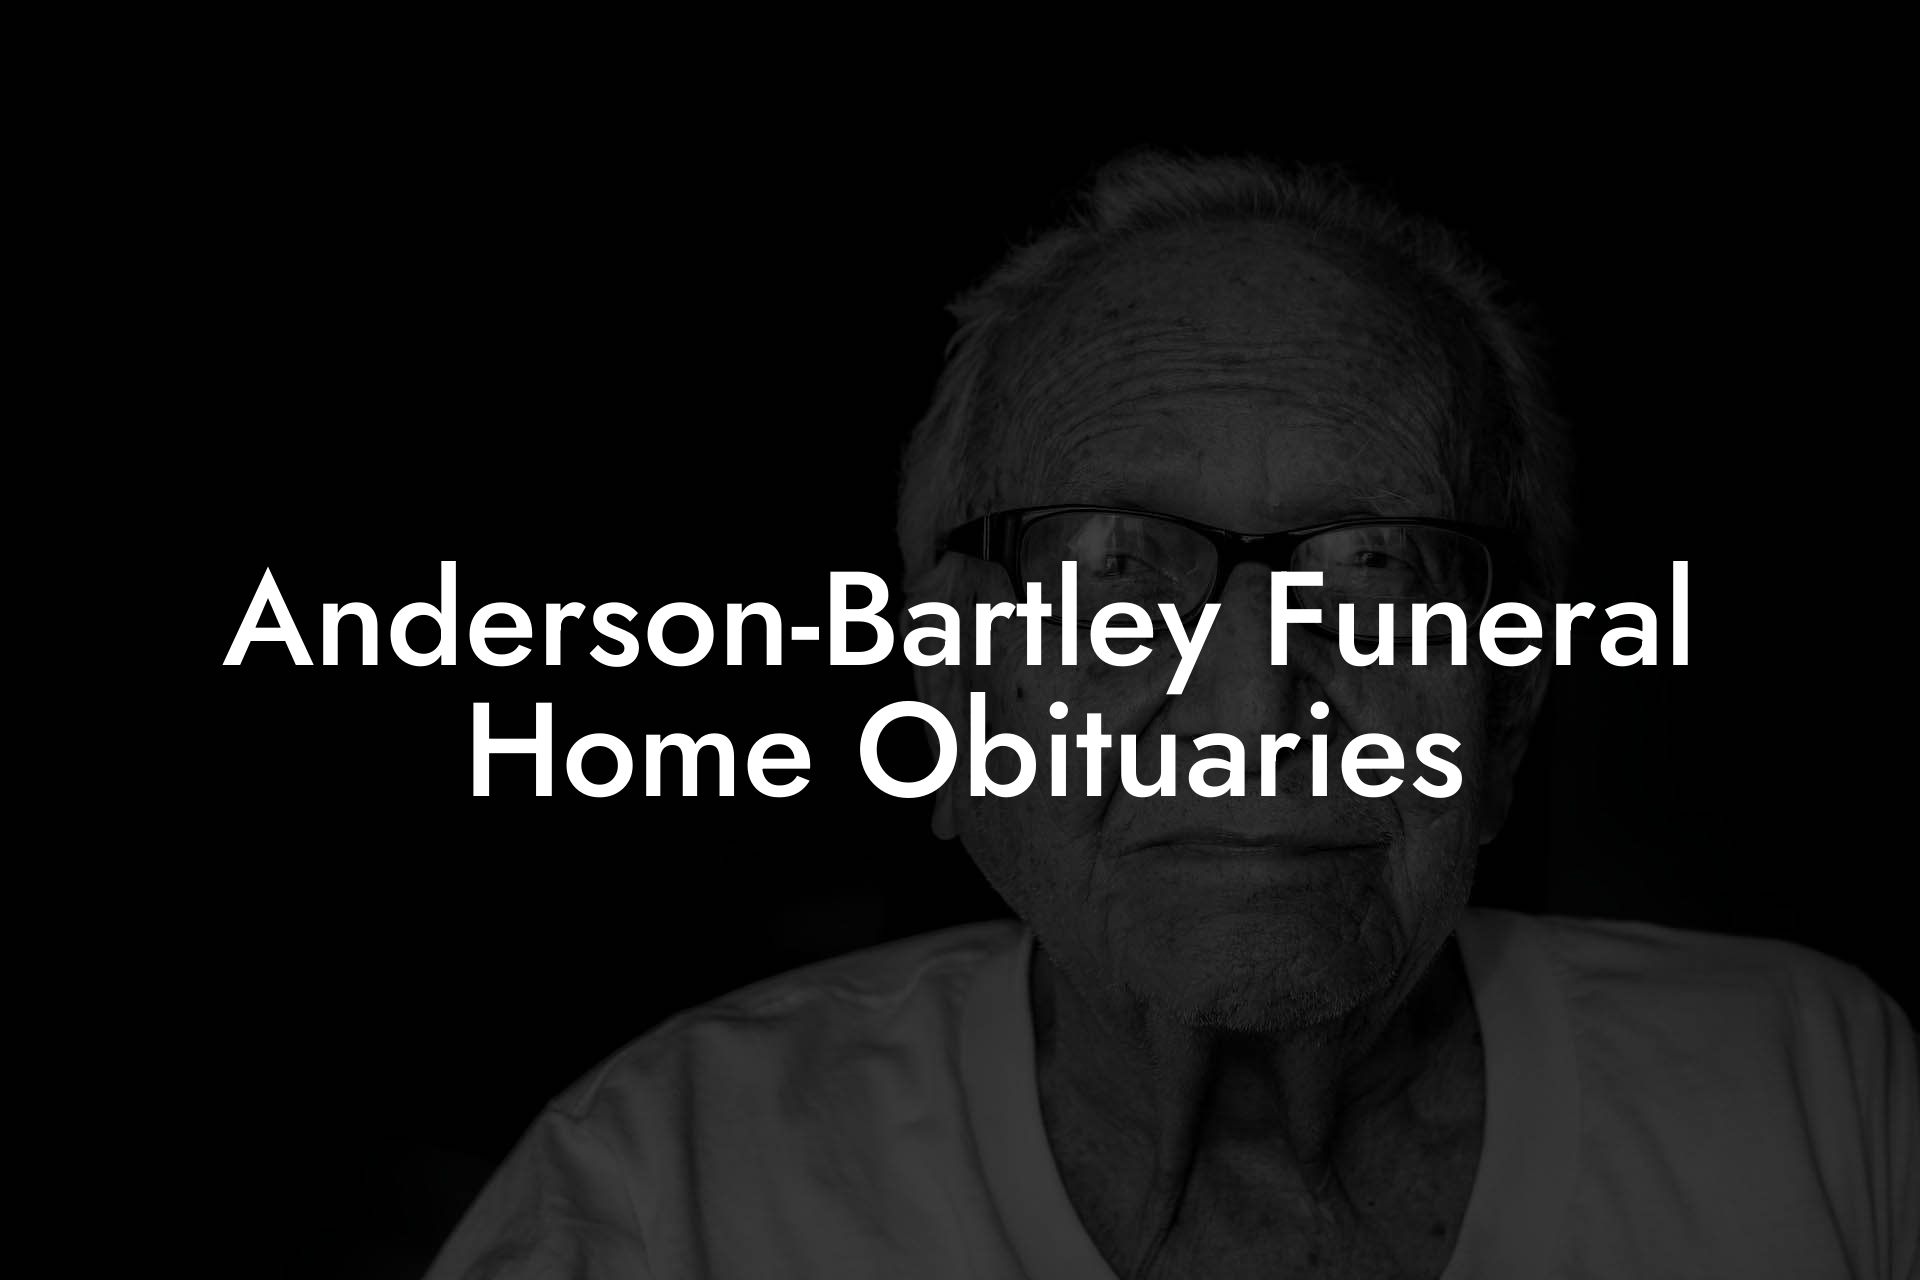 Anderson-Bartley Funeral Home Obituaries